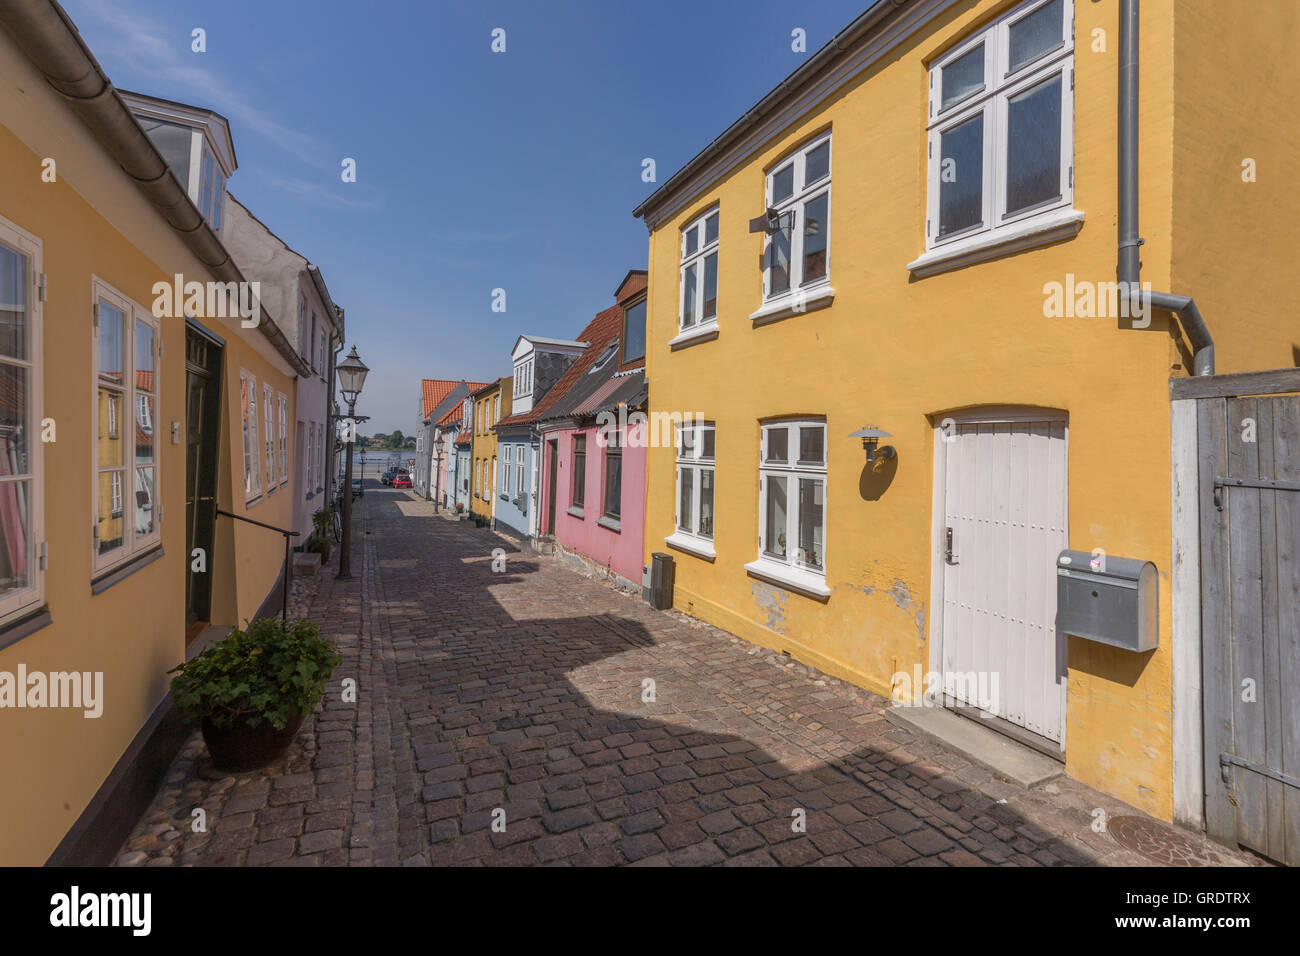 Colorful Row Of Houses In The Town Of Falster Denmark Stock Photo -